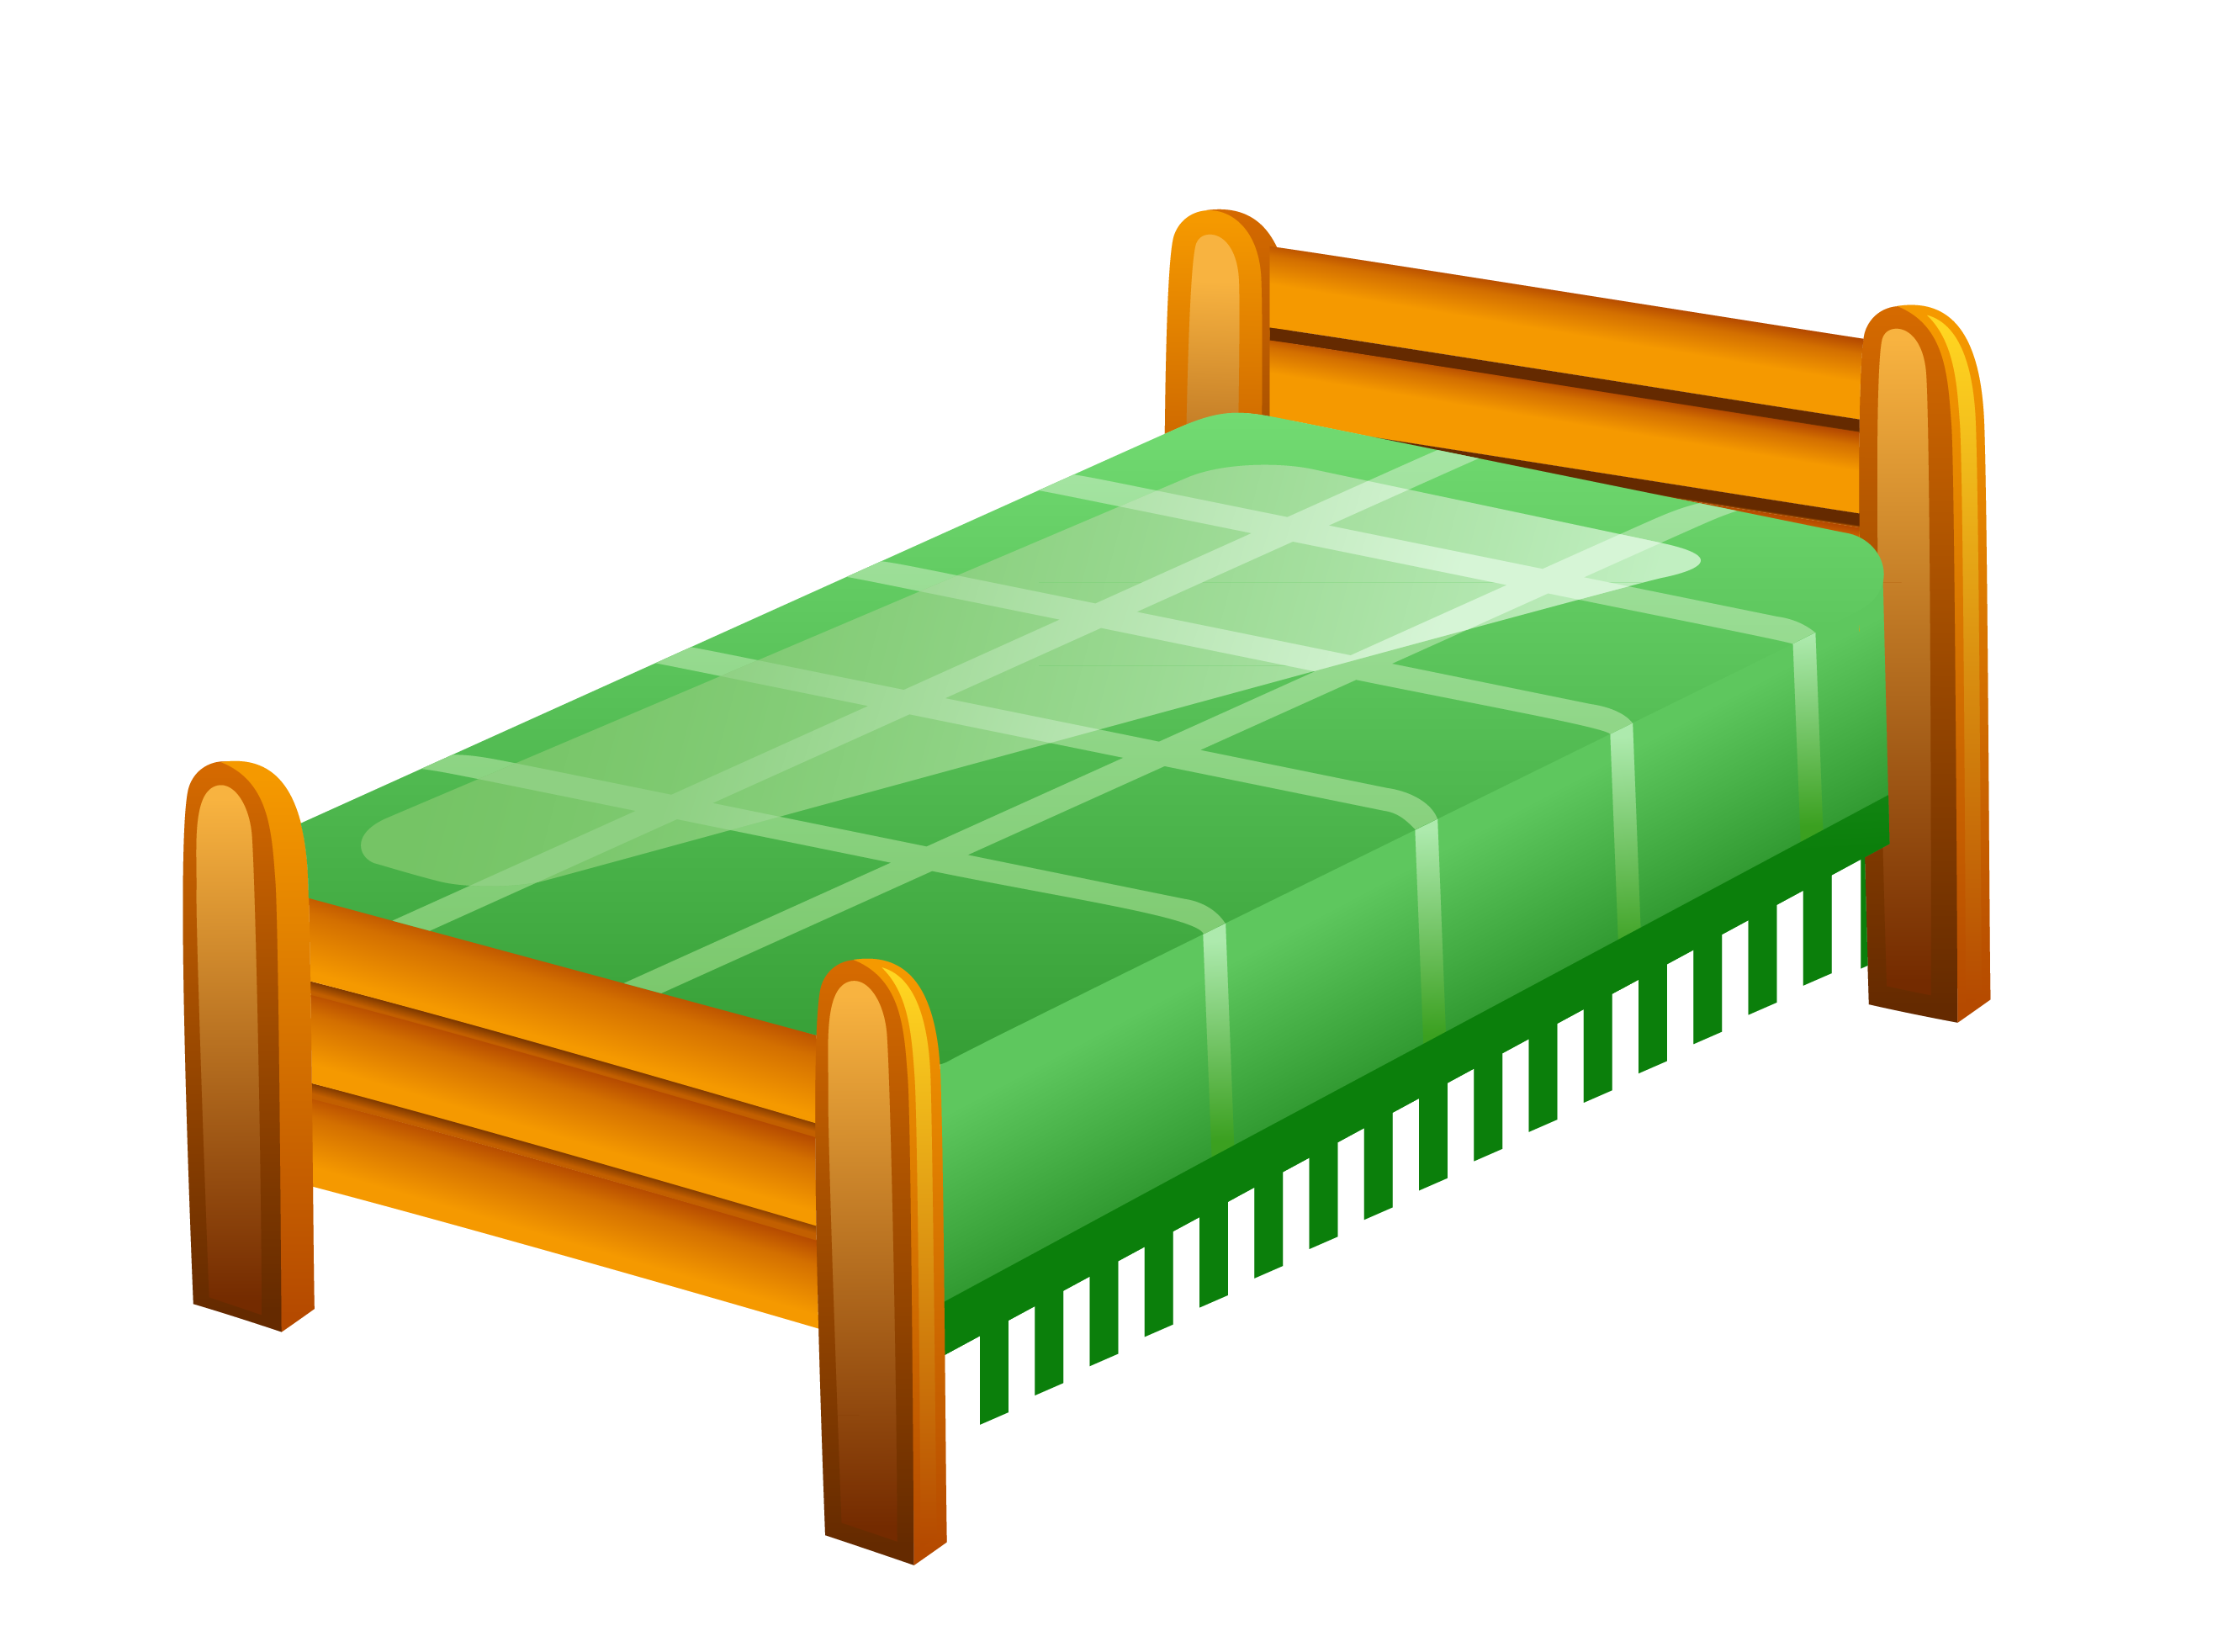 Bed Vector Png